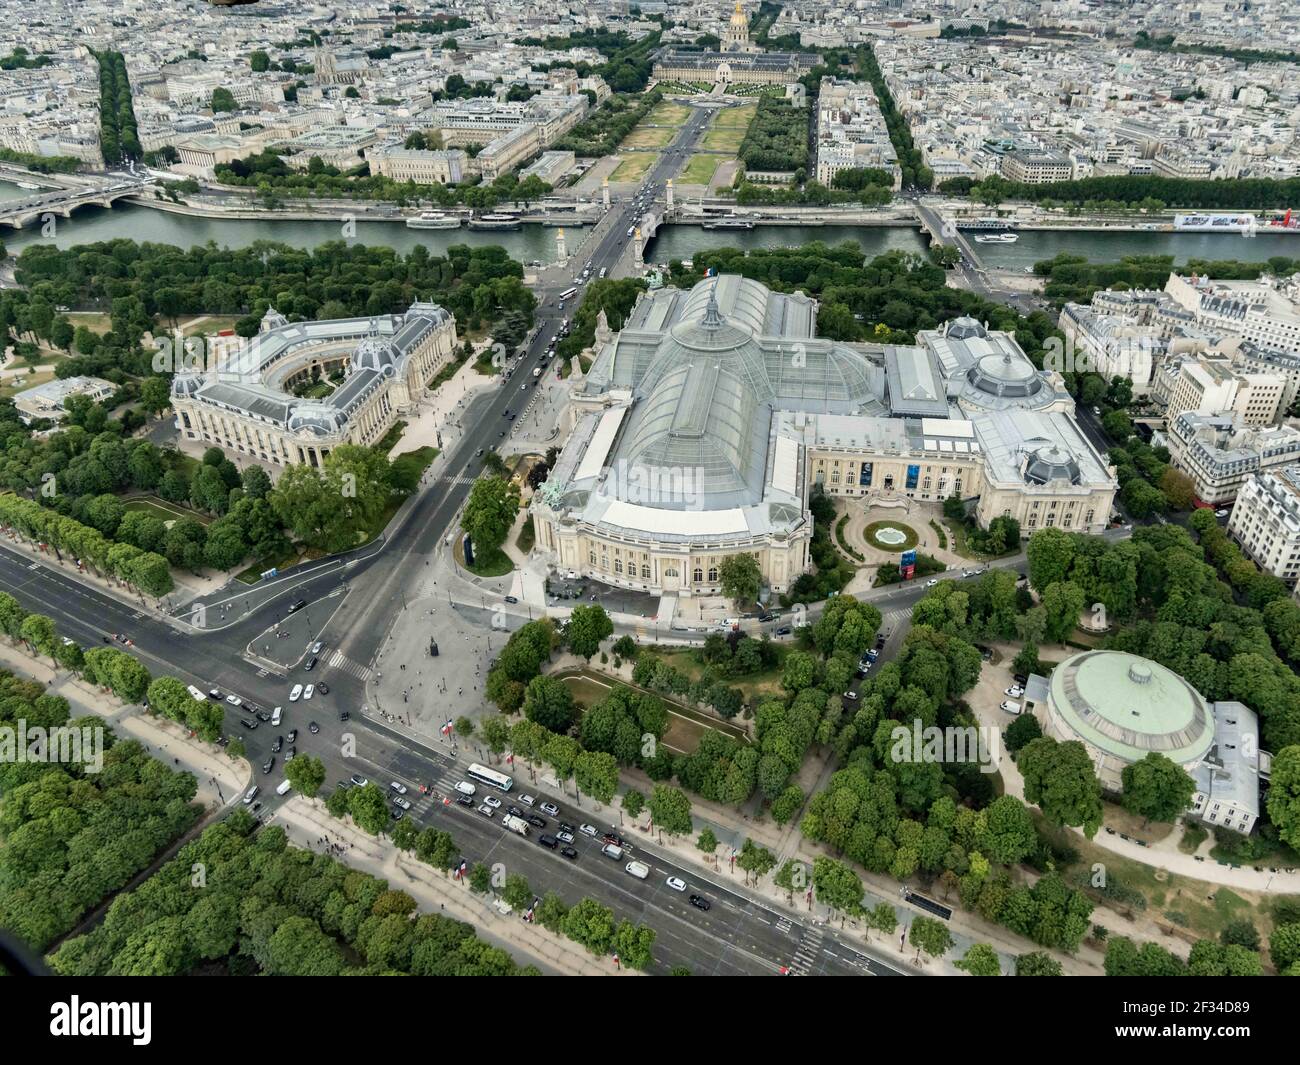 File photo dated July 11, 2019 of an aerial view of the Grand Palais in Paris, France. The Grand Palais, a Mecca for the arts and sciences for 120 years in the heart of Paris, will begin its renovation from top to bottom on Friday. The listed complex, comprising three buildings built for the 1900 Universal Exhibition, will reopen partially in the spring of 2024 (for the nave and adjoining galleries) and completely in the spring of 2025. Photo by Mario Fourmy/ABACAPRESS.COM Stock Photo